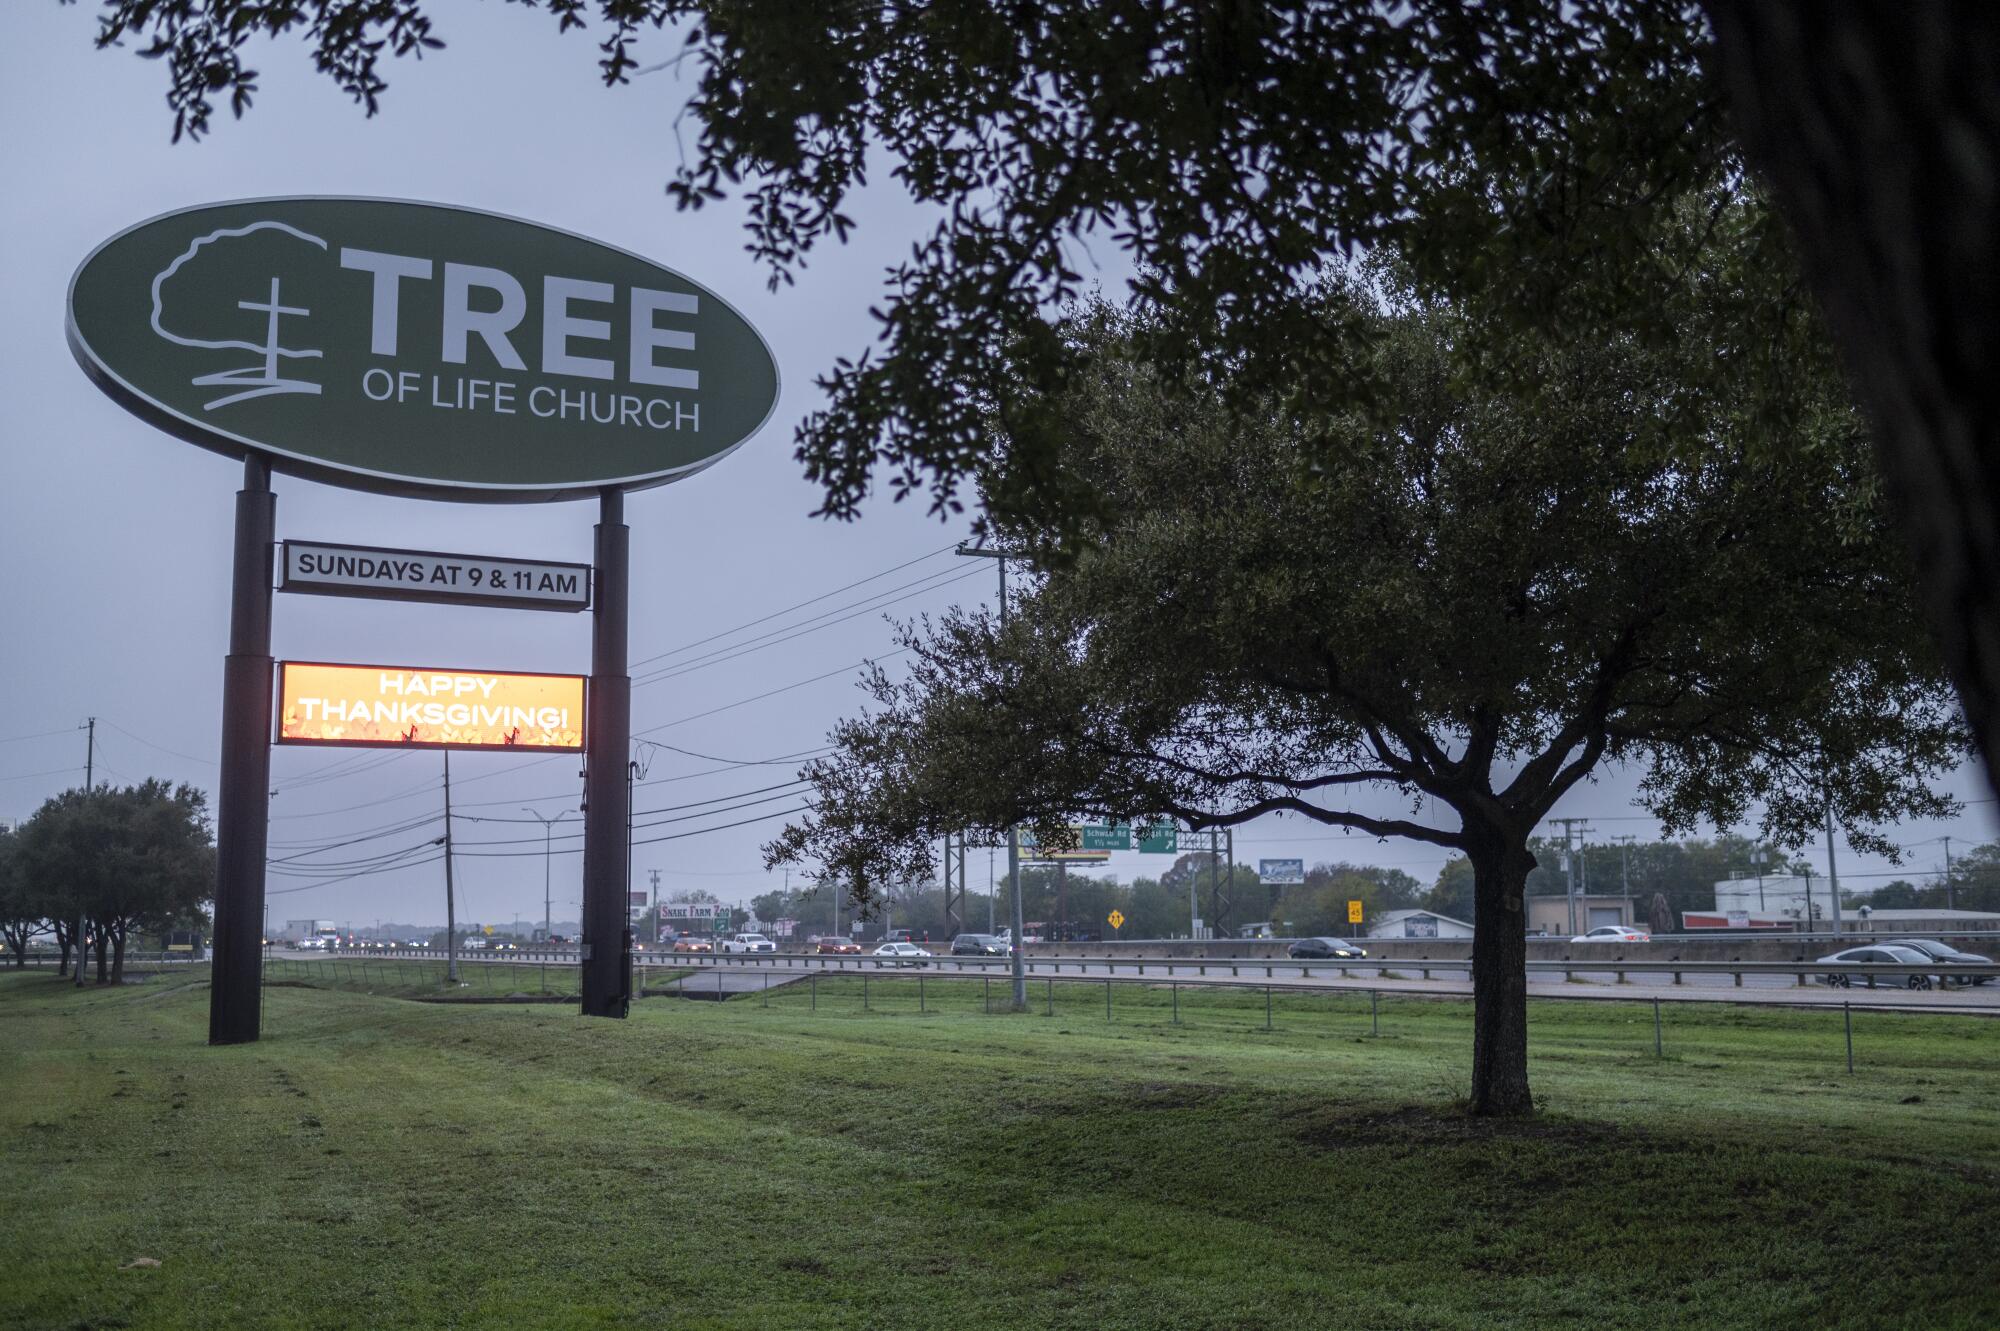 A sign along a tree-lined road marks the Tree of Life Church